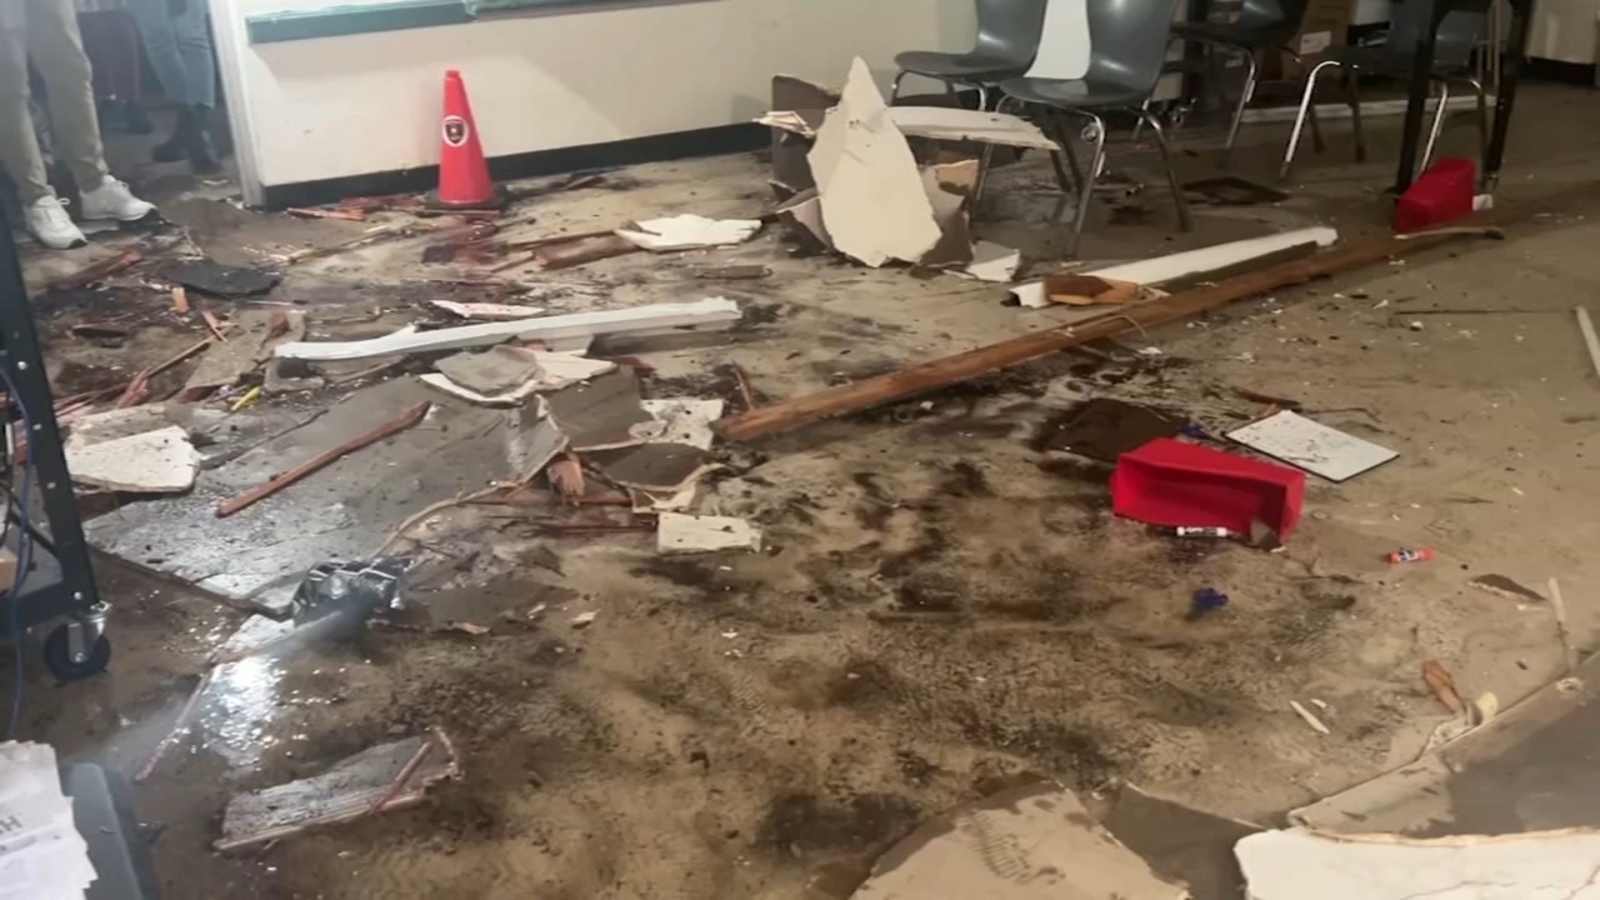 HISD storm damage: District expected to announce school openings following deadly rain and wind batter several campuses [Video]